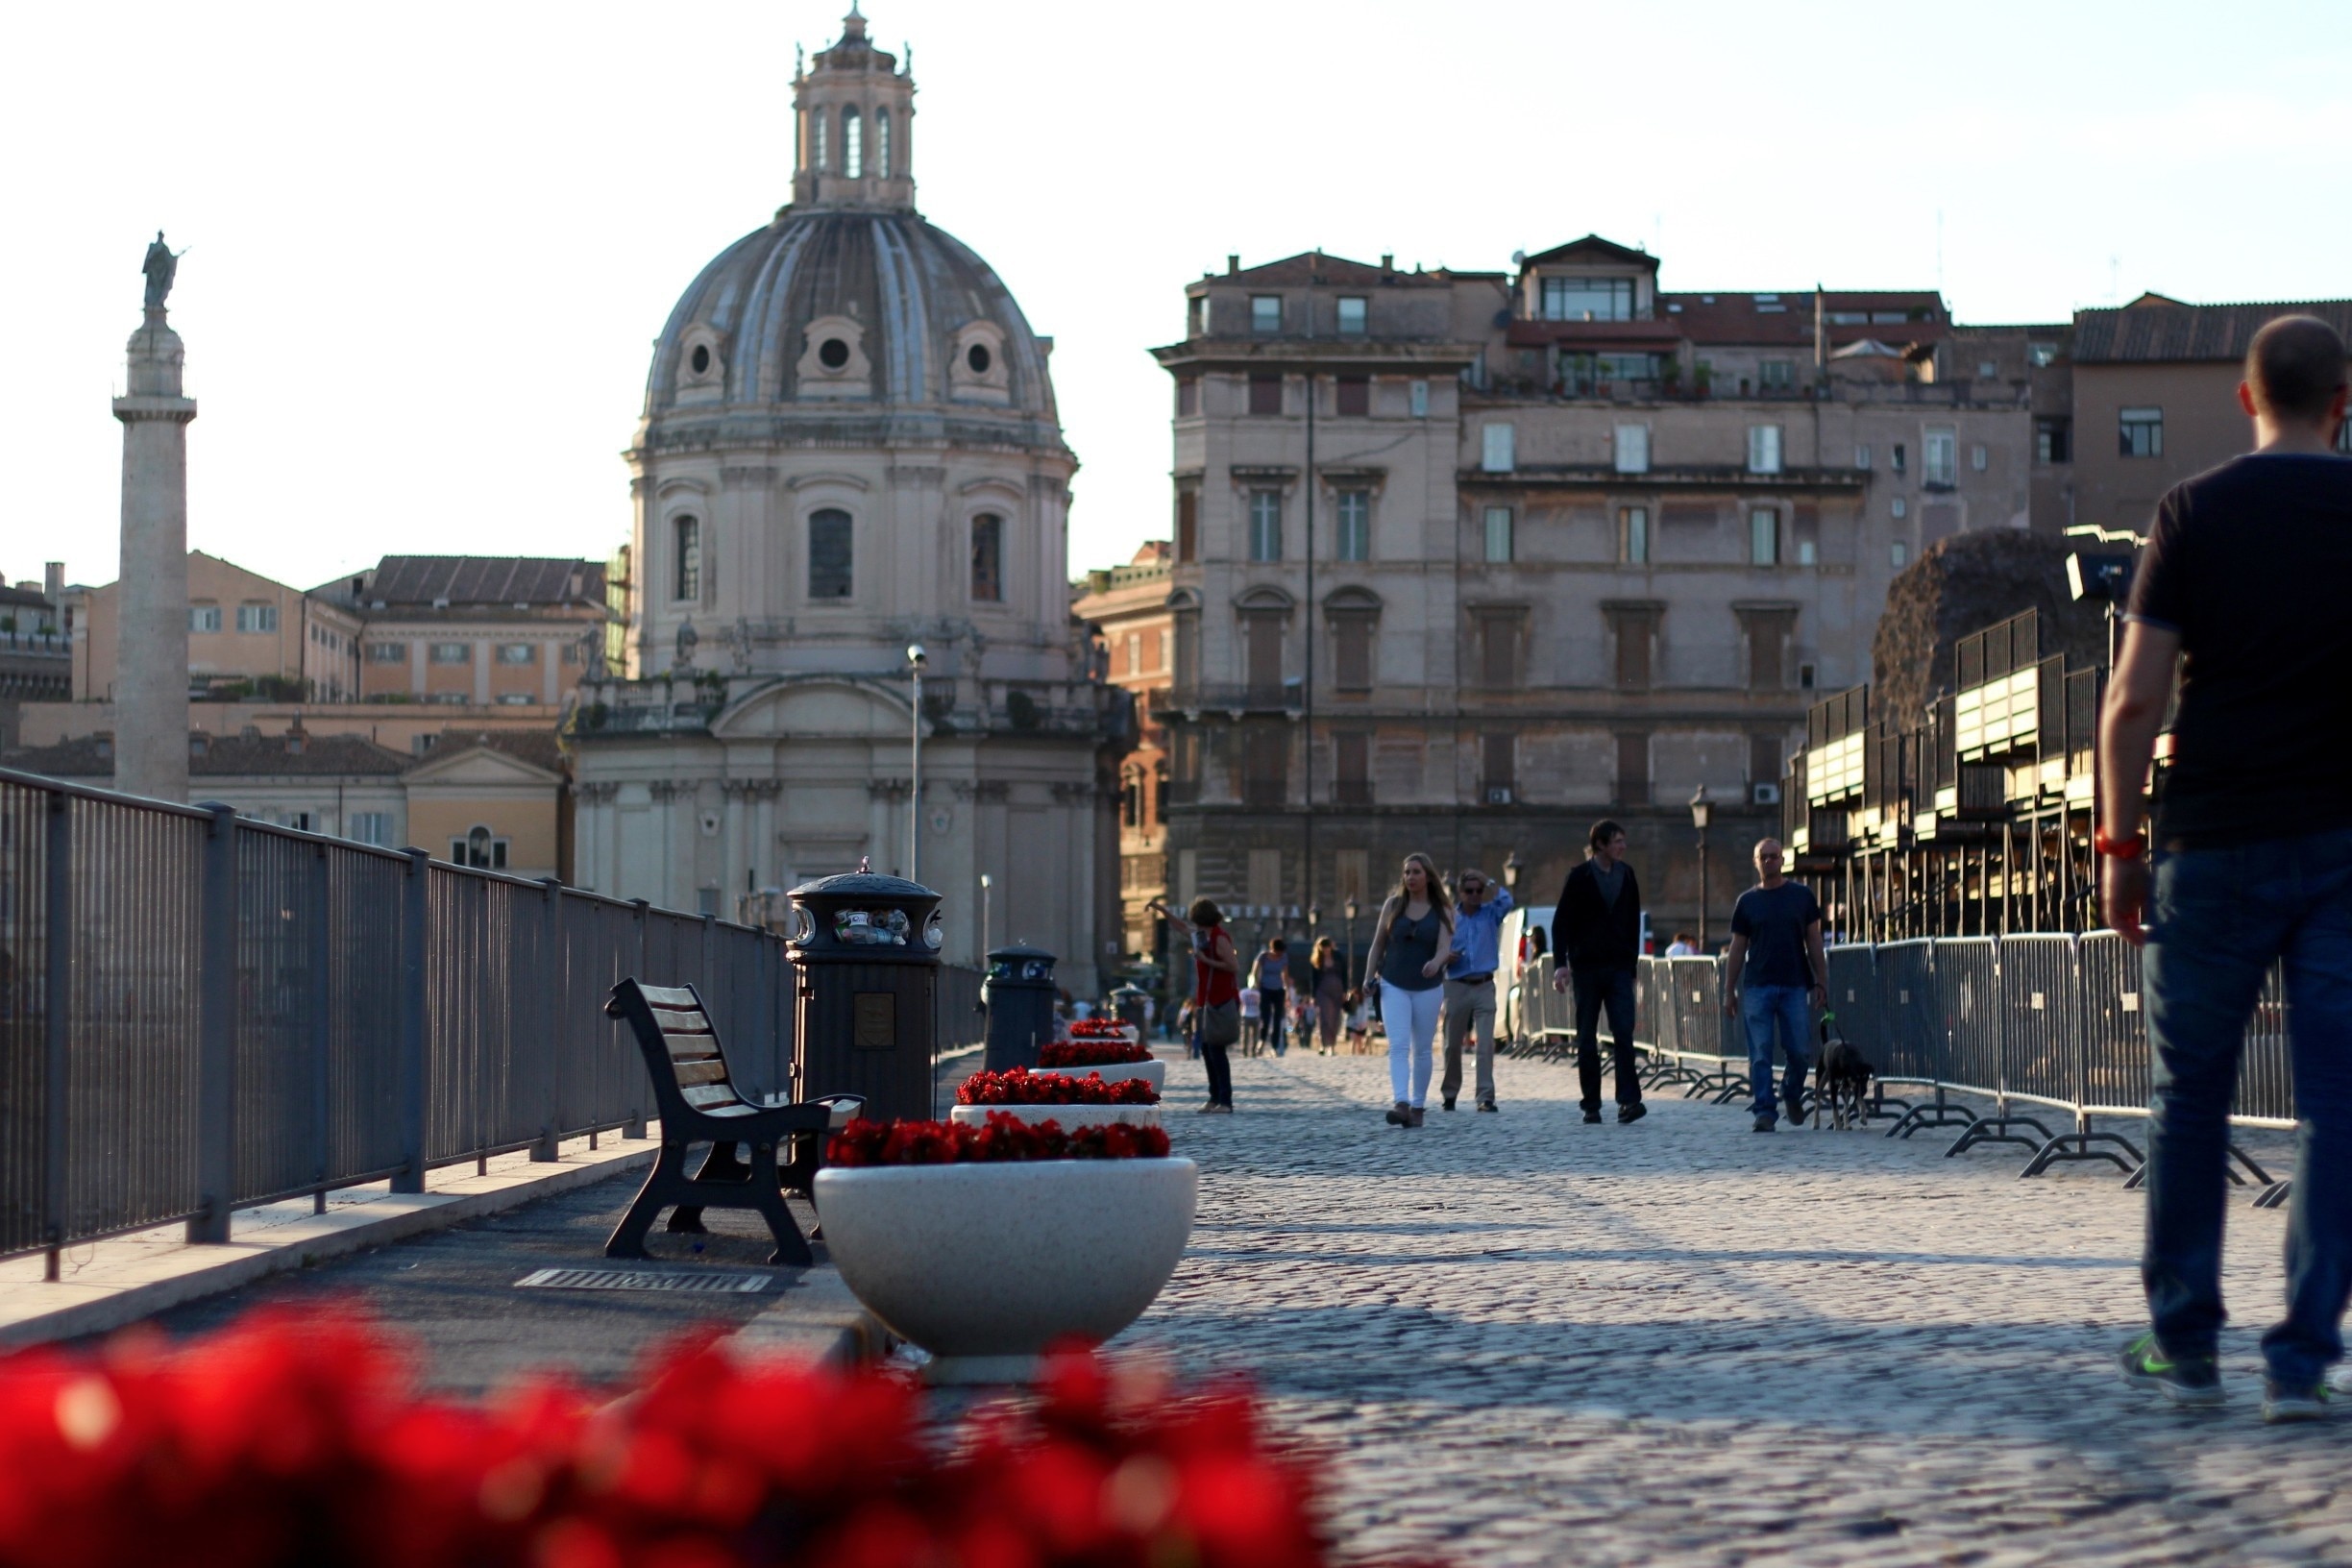 The Great Beauty of Rome. A street in the middle of the roman forum. Rome, Italy #Architecture